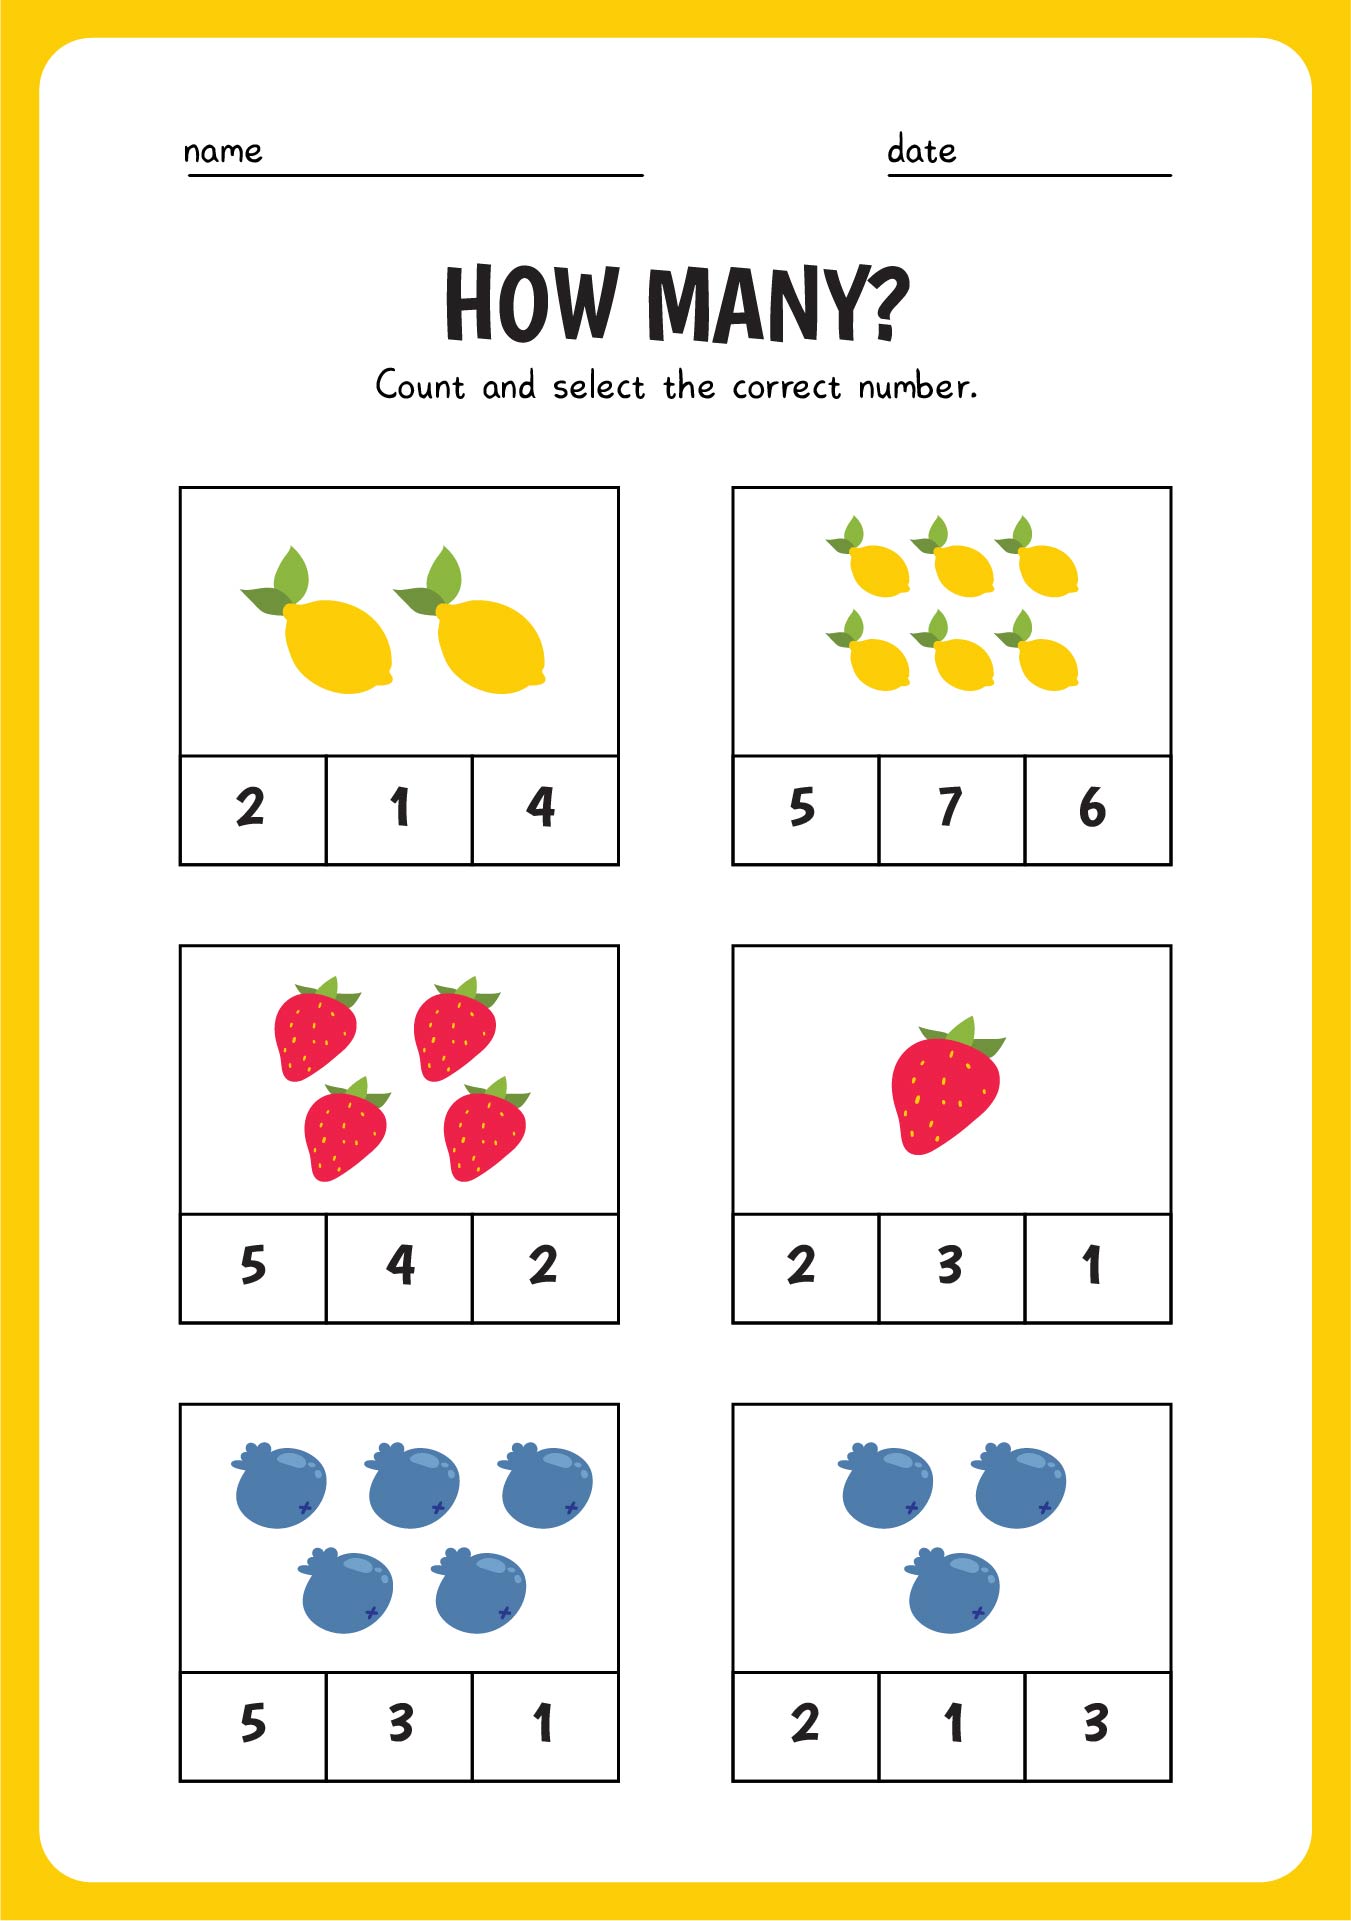 3-years-old-worksheets